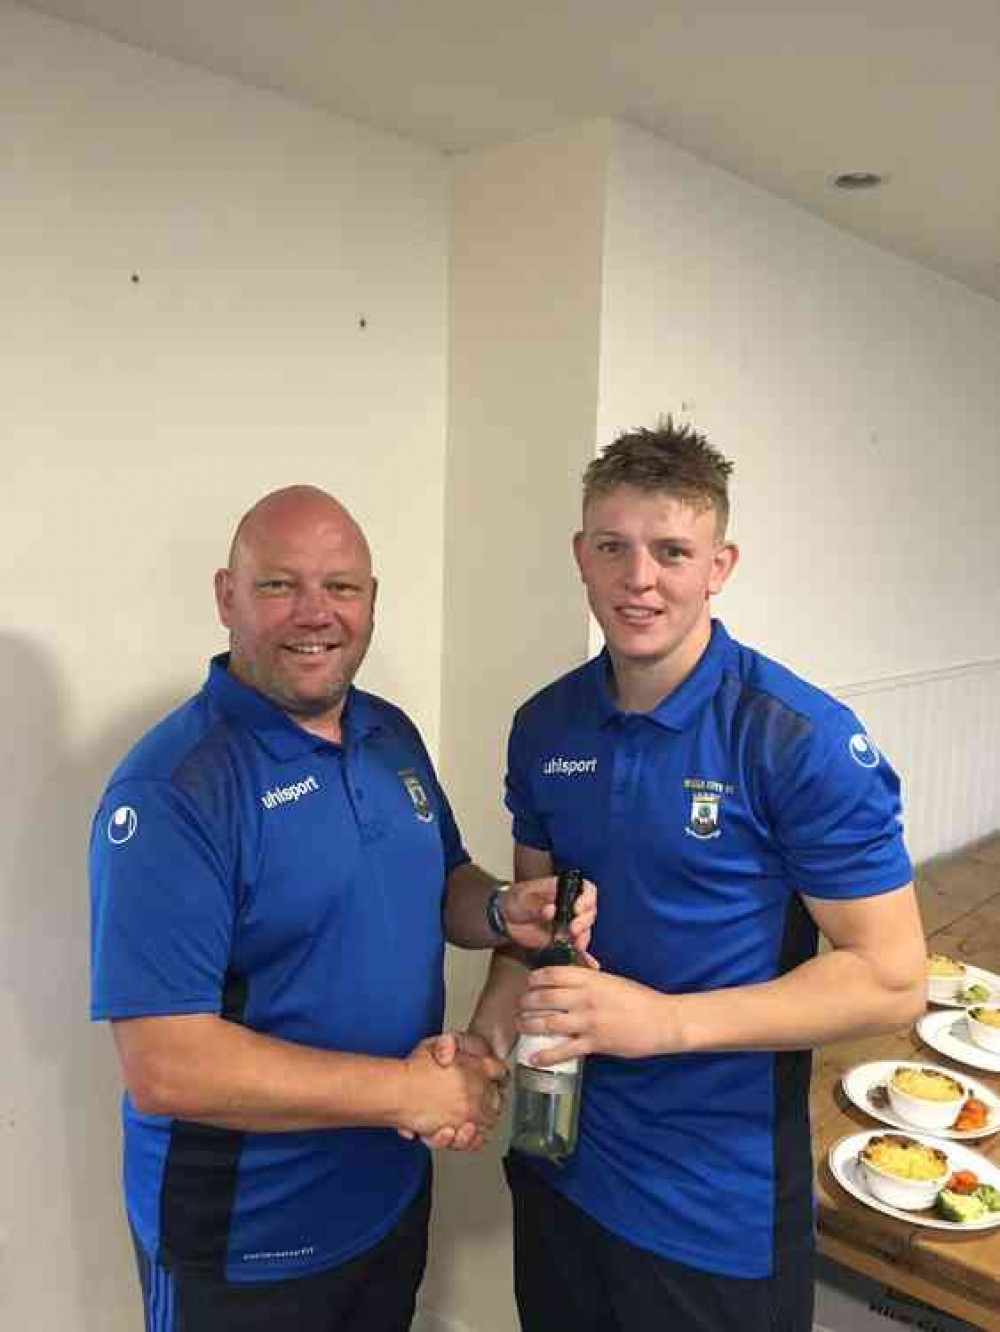 Vice-chairman Mark Phipps presenting the man of the match award to skipper and hat-trick hero Ross Padfield